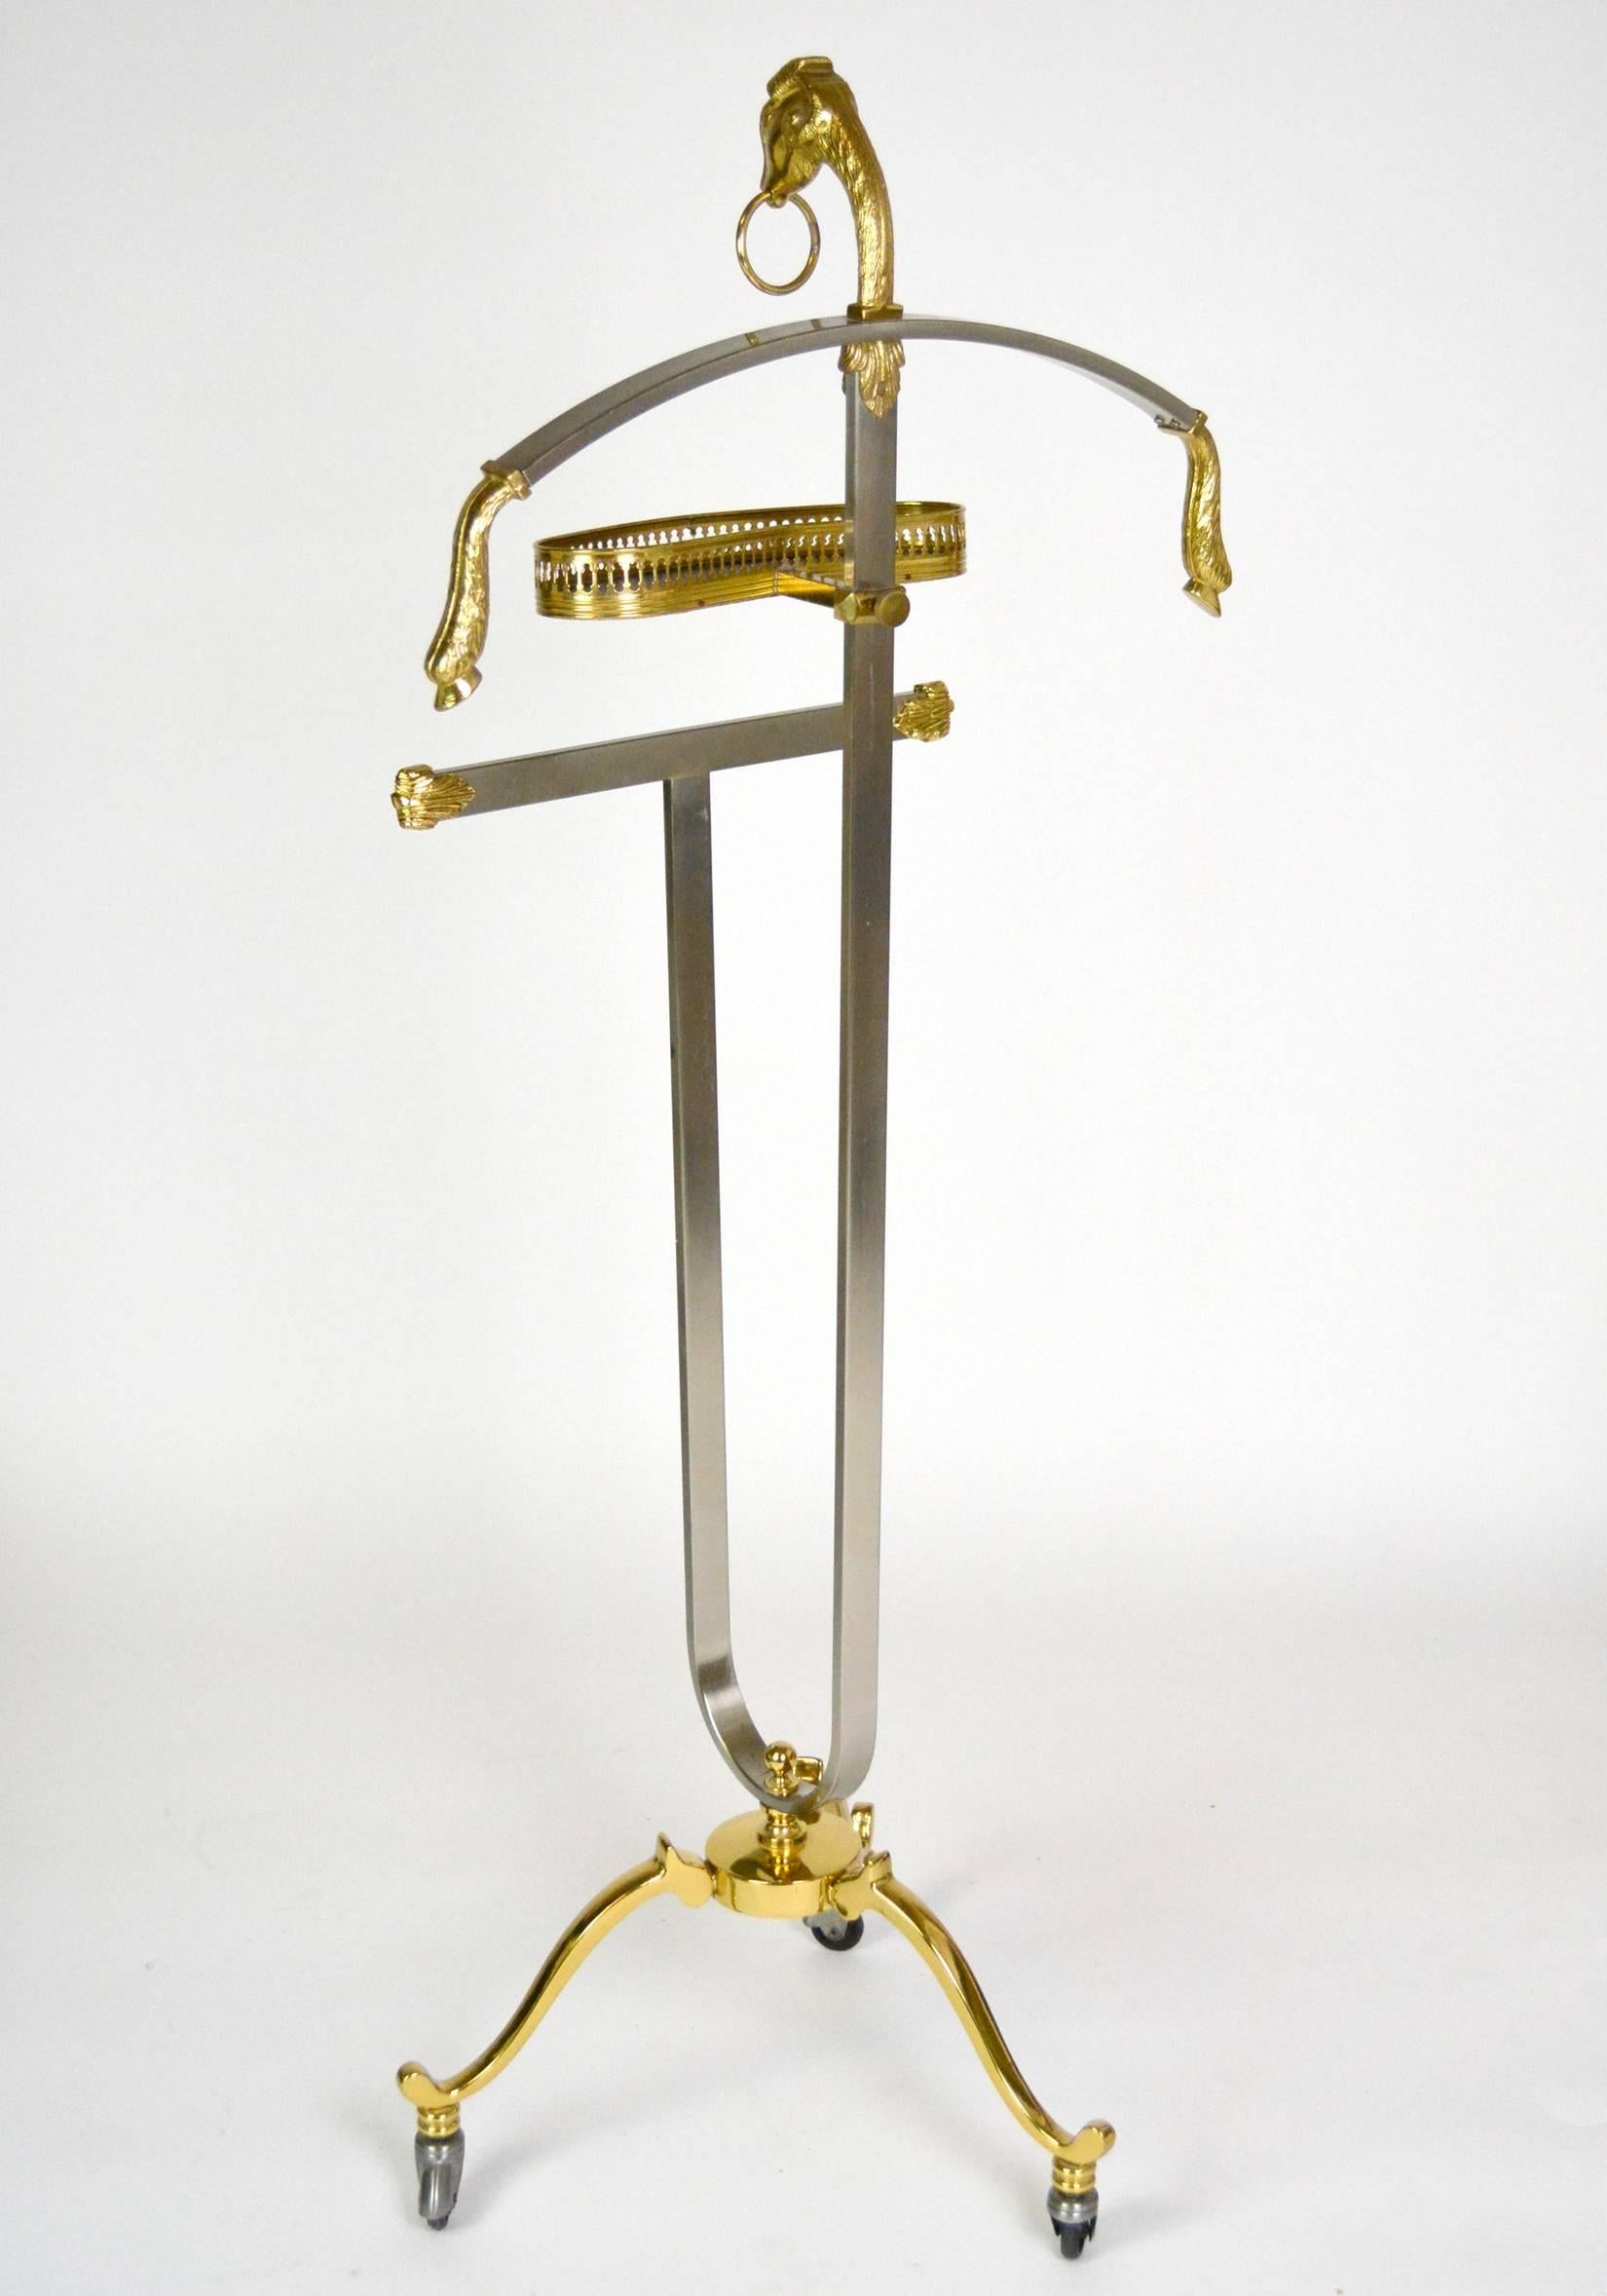 A beautiful Italian steel and brass valet with cast ram's heads with ring and hooves accents. Adjustable leatherette lined jewelry tray and a tripod base with brass caster wheels. The base measures at 15 1/2" in diameter. Marked 'Made in